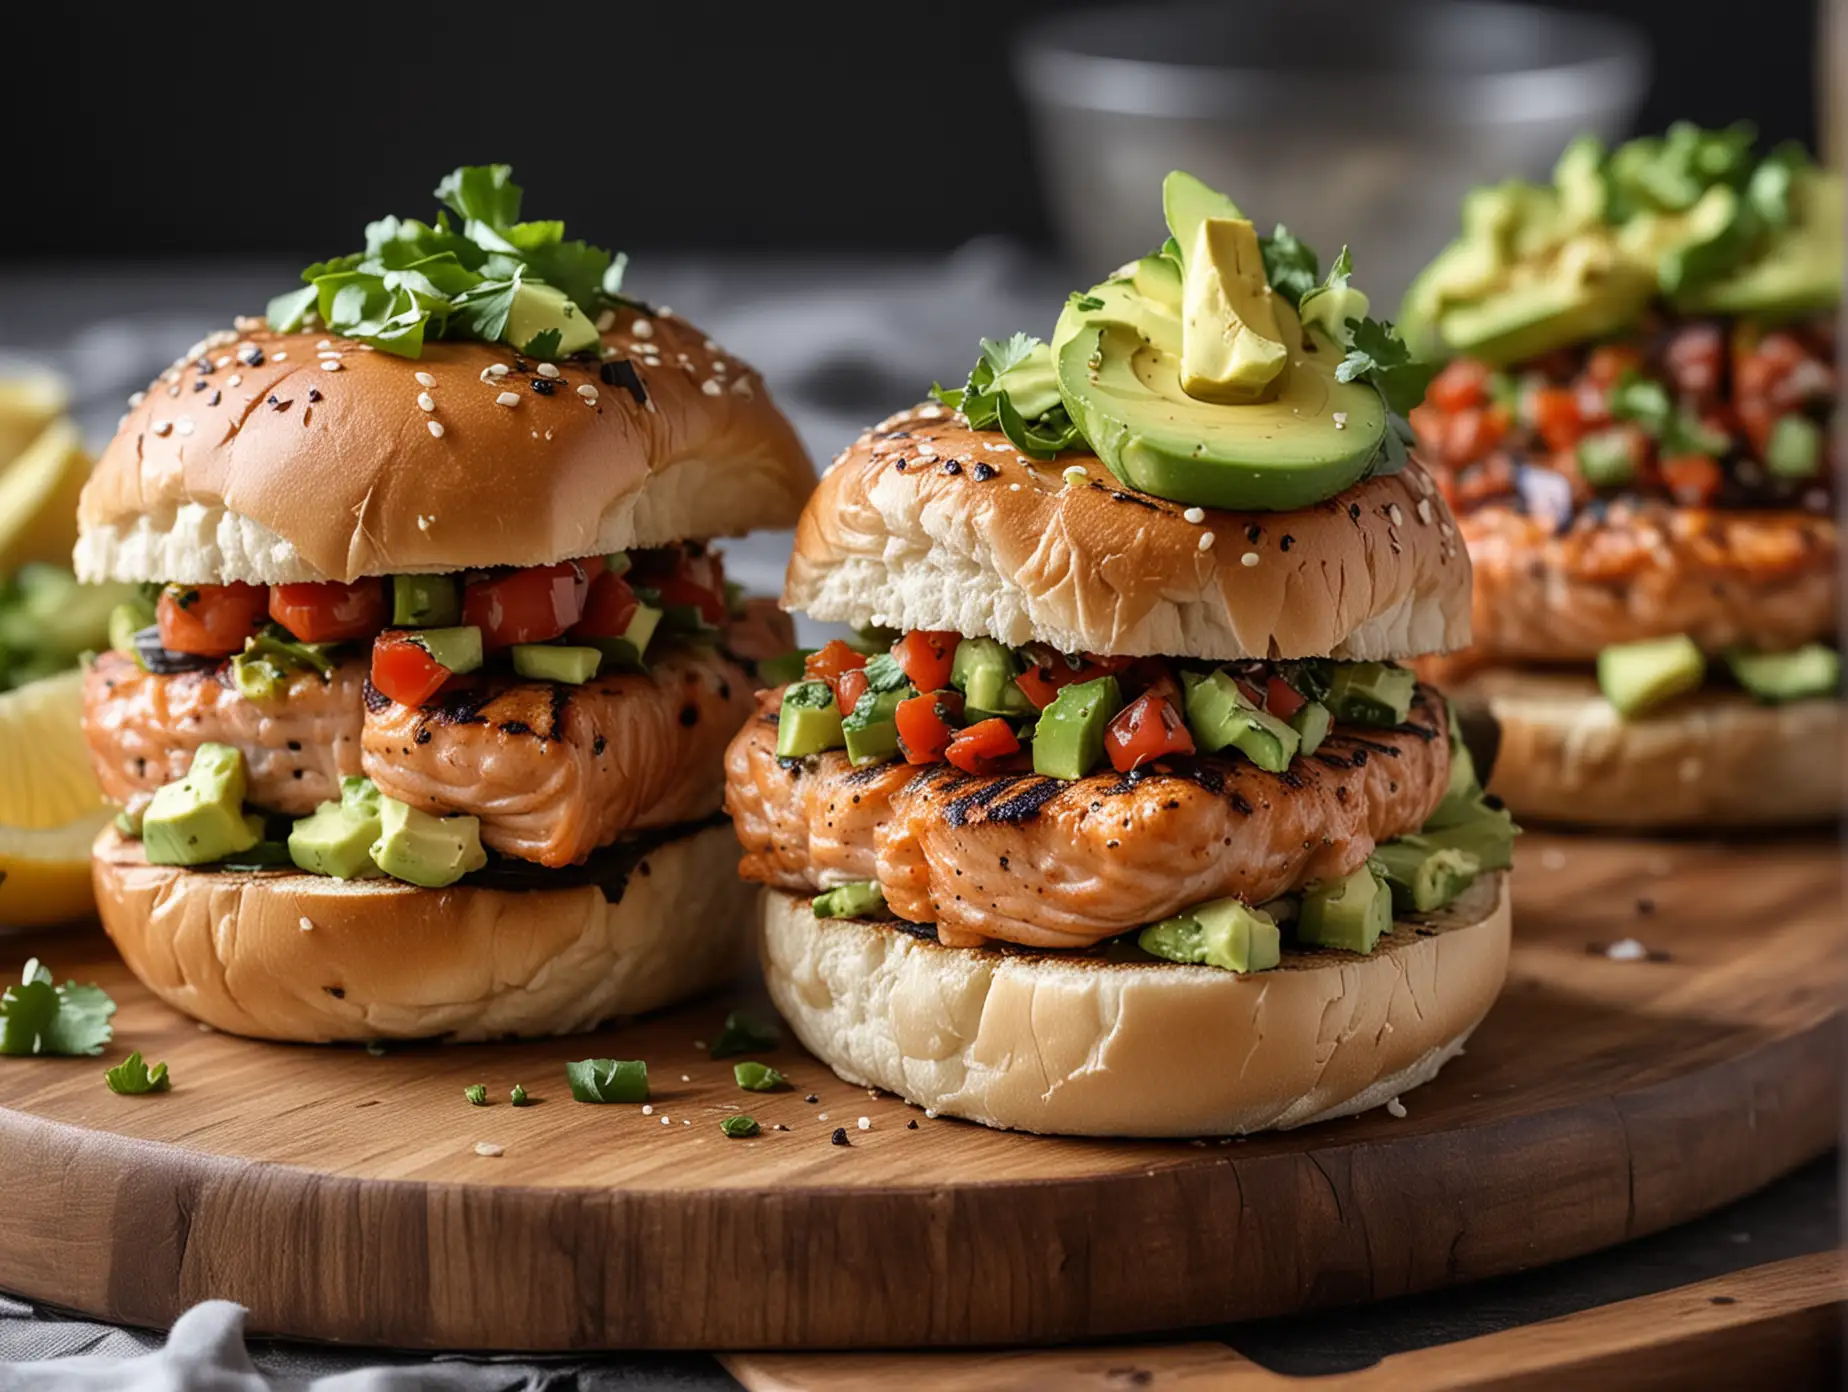 /imagine prompt: https://www.cookincanuck.com/wp-content/uploads/2022/05/Grilled-Salmon-Burgers-Avocado-Blog-10.jpg STYLE: Close-up Shot Top view | EMOTION: Tempting I SCENE: Grilled Salmon Burgers with Avocado Salsa | TAGS: High-end food photography, 
clean composition, dramatic lighting, luxurious, elegant, mouth-watering, indulgent, gourmet | CAMERA: Nikon Z7 | FOCAL LENGTH: 70mm | 
SHOT TYPE: Close-up | COMPOSITION: Top view Centered | LIGHTING: Soft directional light | PRODUCTION: Food Stylist | 
TIME: Daytime I LOCATION TYPE: Kitchen near windows --ar 3:2